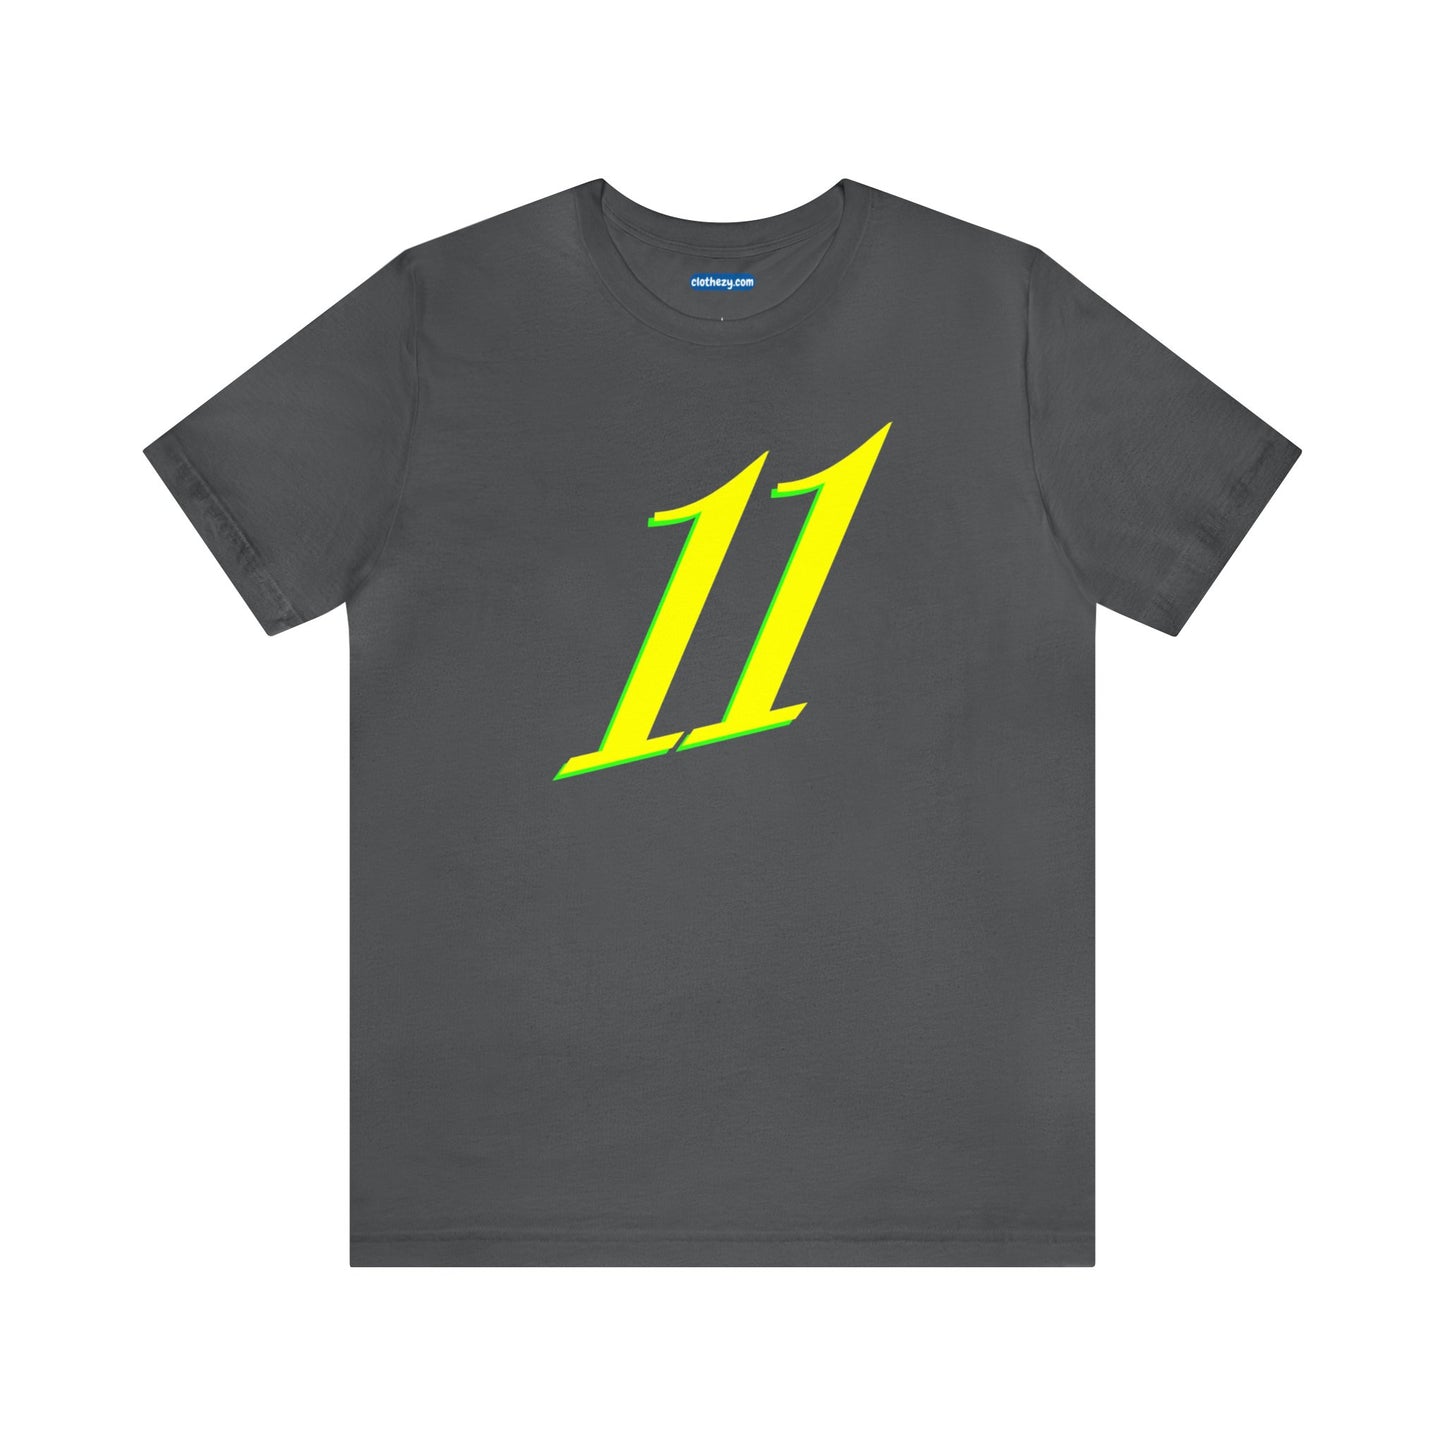 Number 11 Design - Soft Cotton Tee for birthdays and celebrations, Gift for friends and family, Multiple Options by clothezy.com in Black Size Small - Buy Now